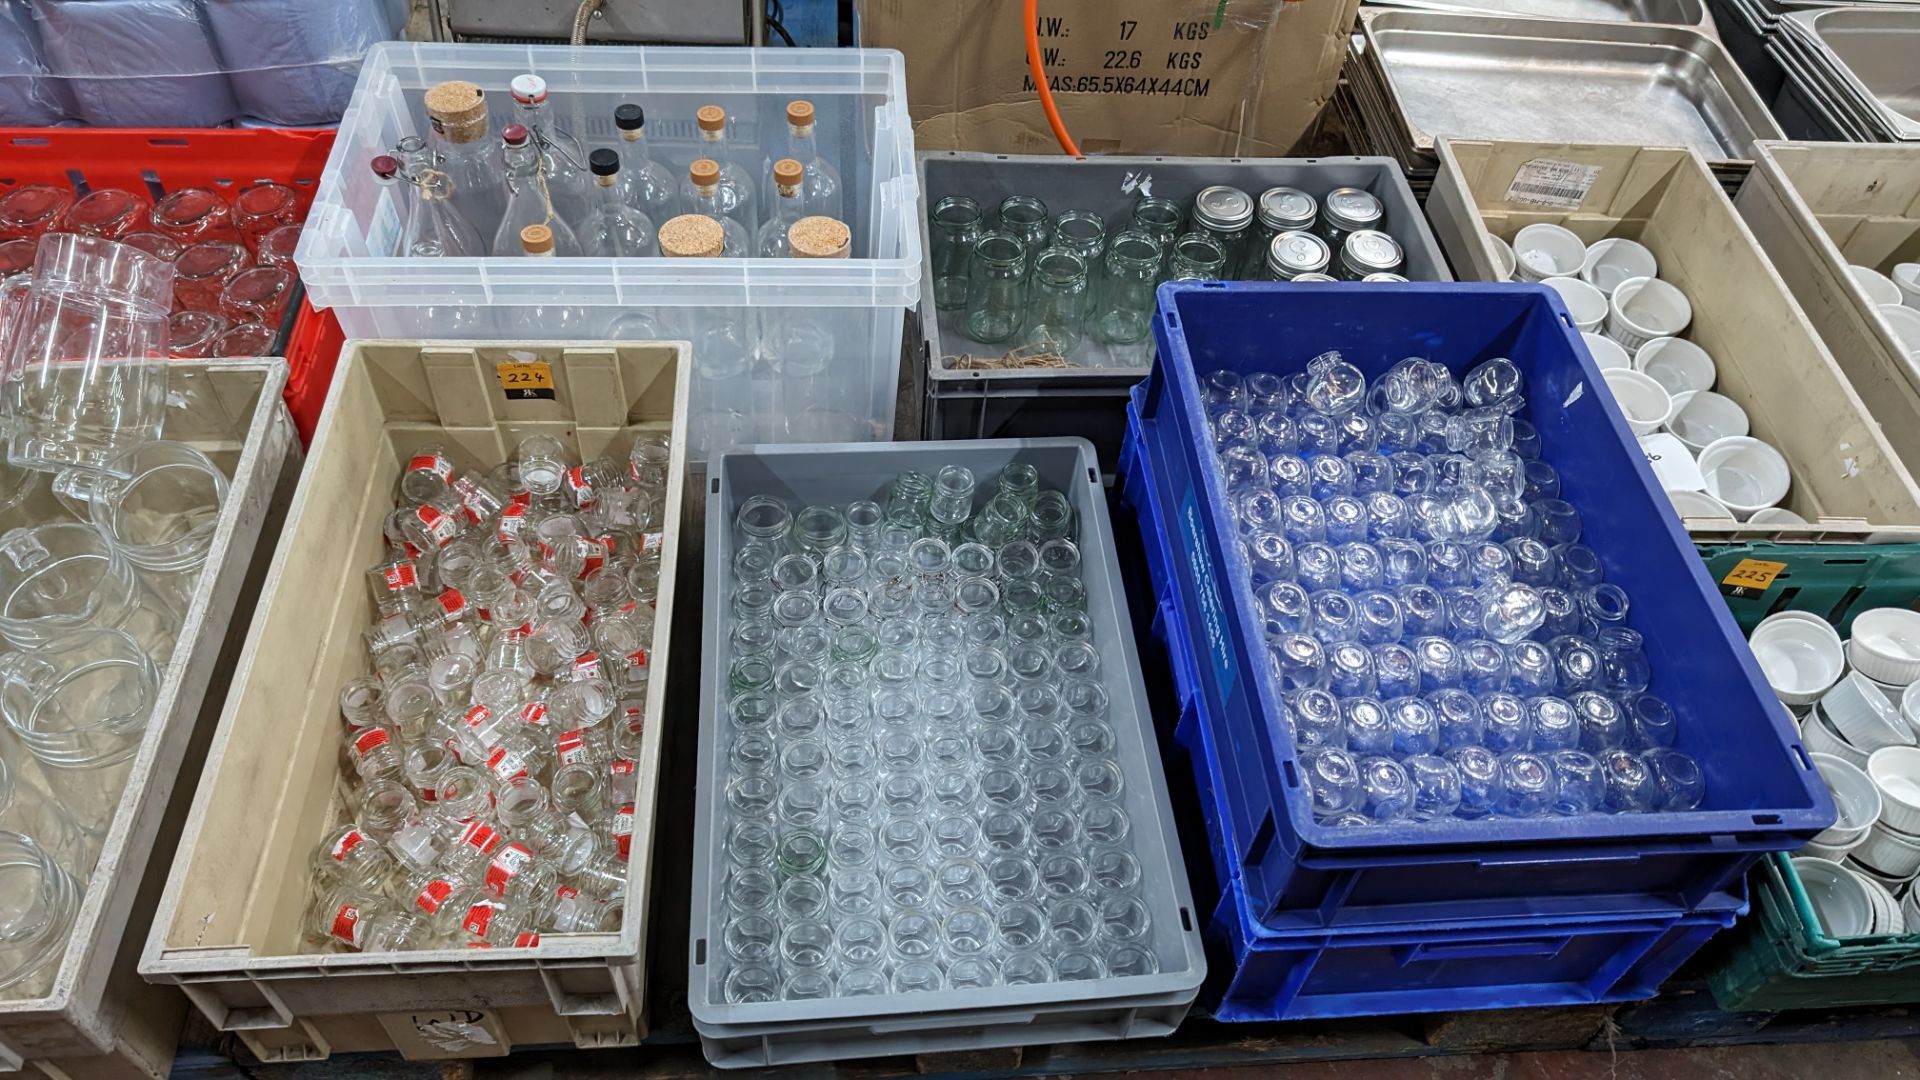 The contents of a pallet of jars comprising the contents of 6 crates. NB crates excluded